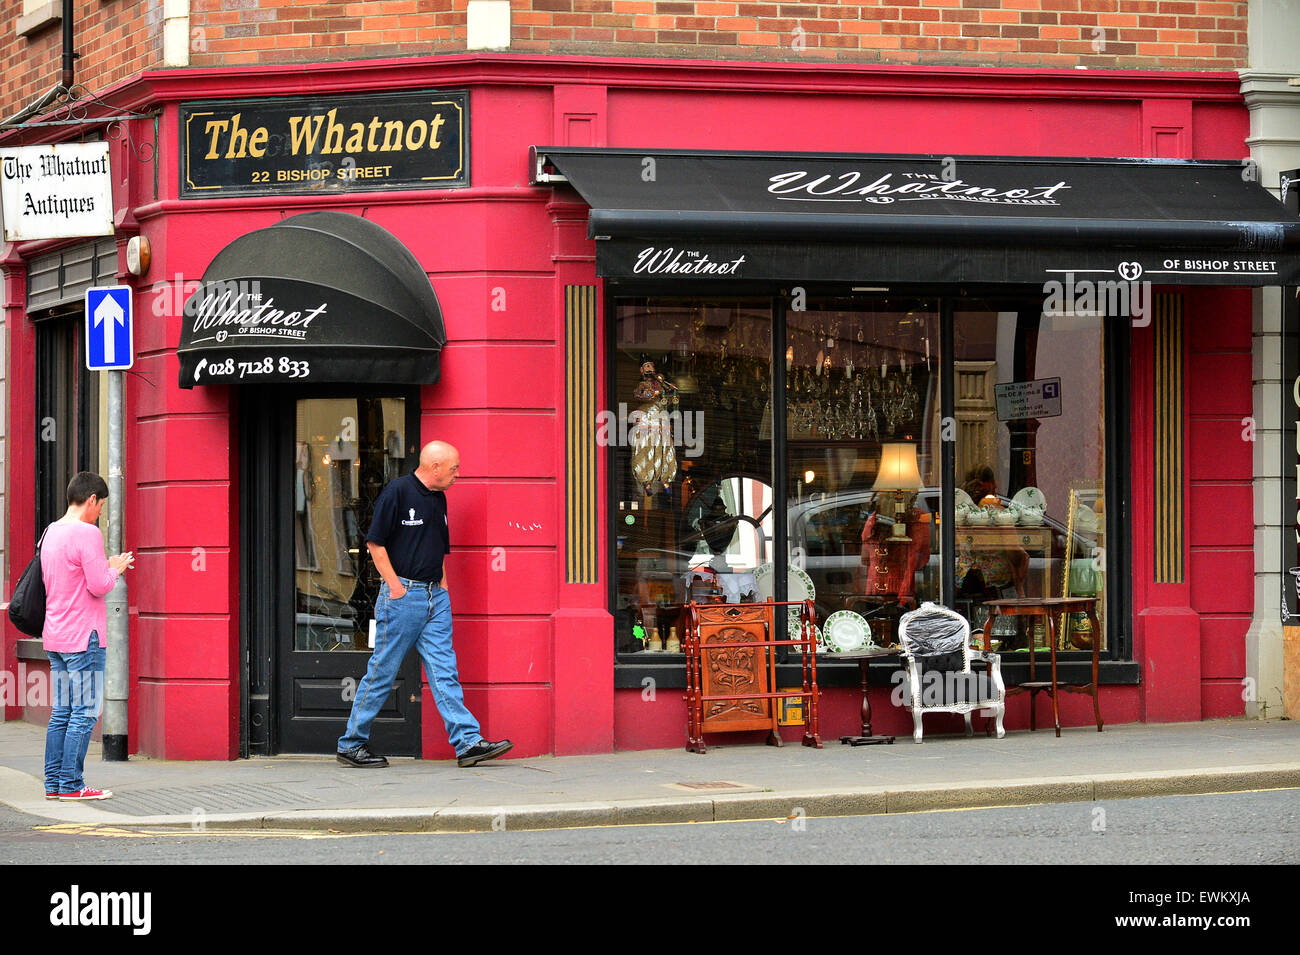 The Whatnot antique shop in Bishop Street, Londonderry (Derry), Northern Ireland. Stock Photo